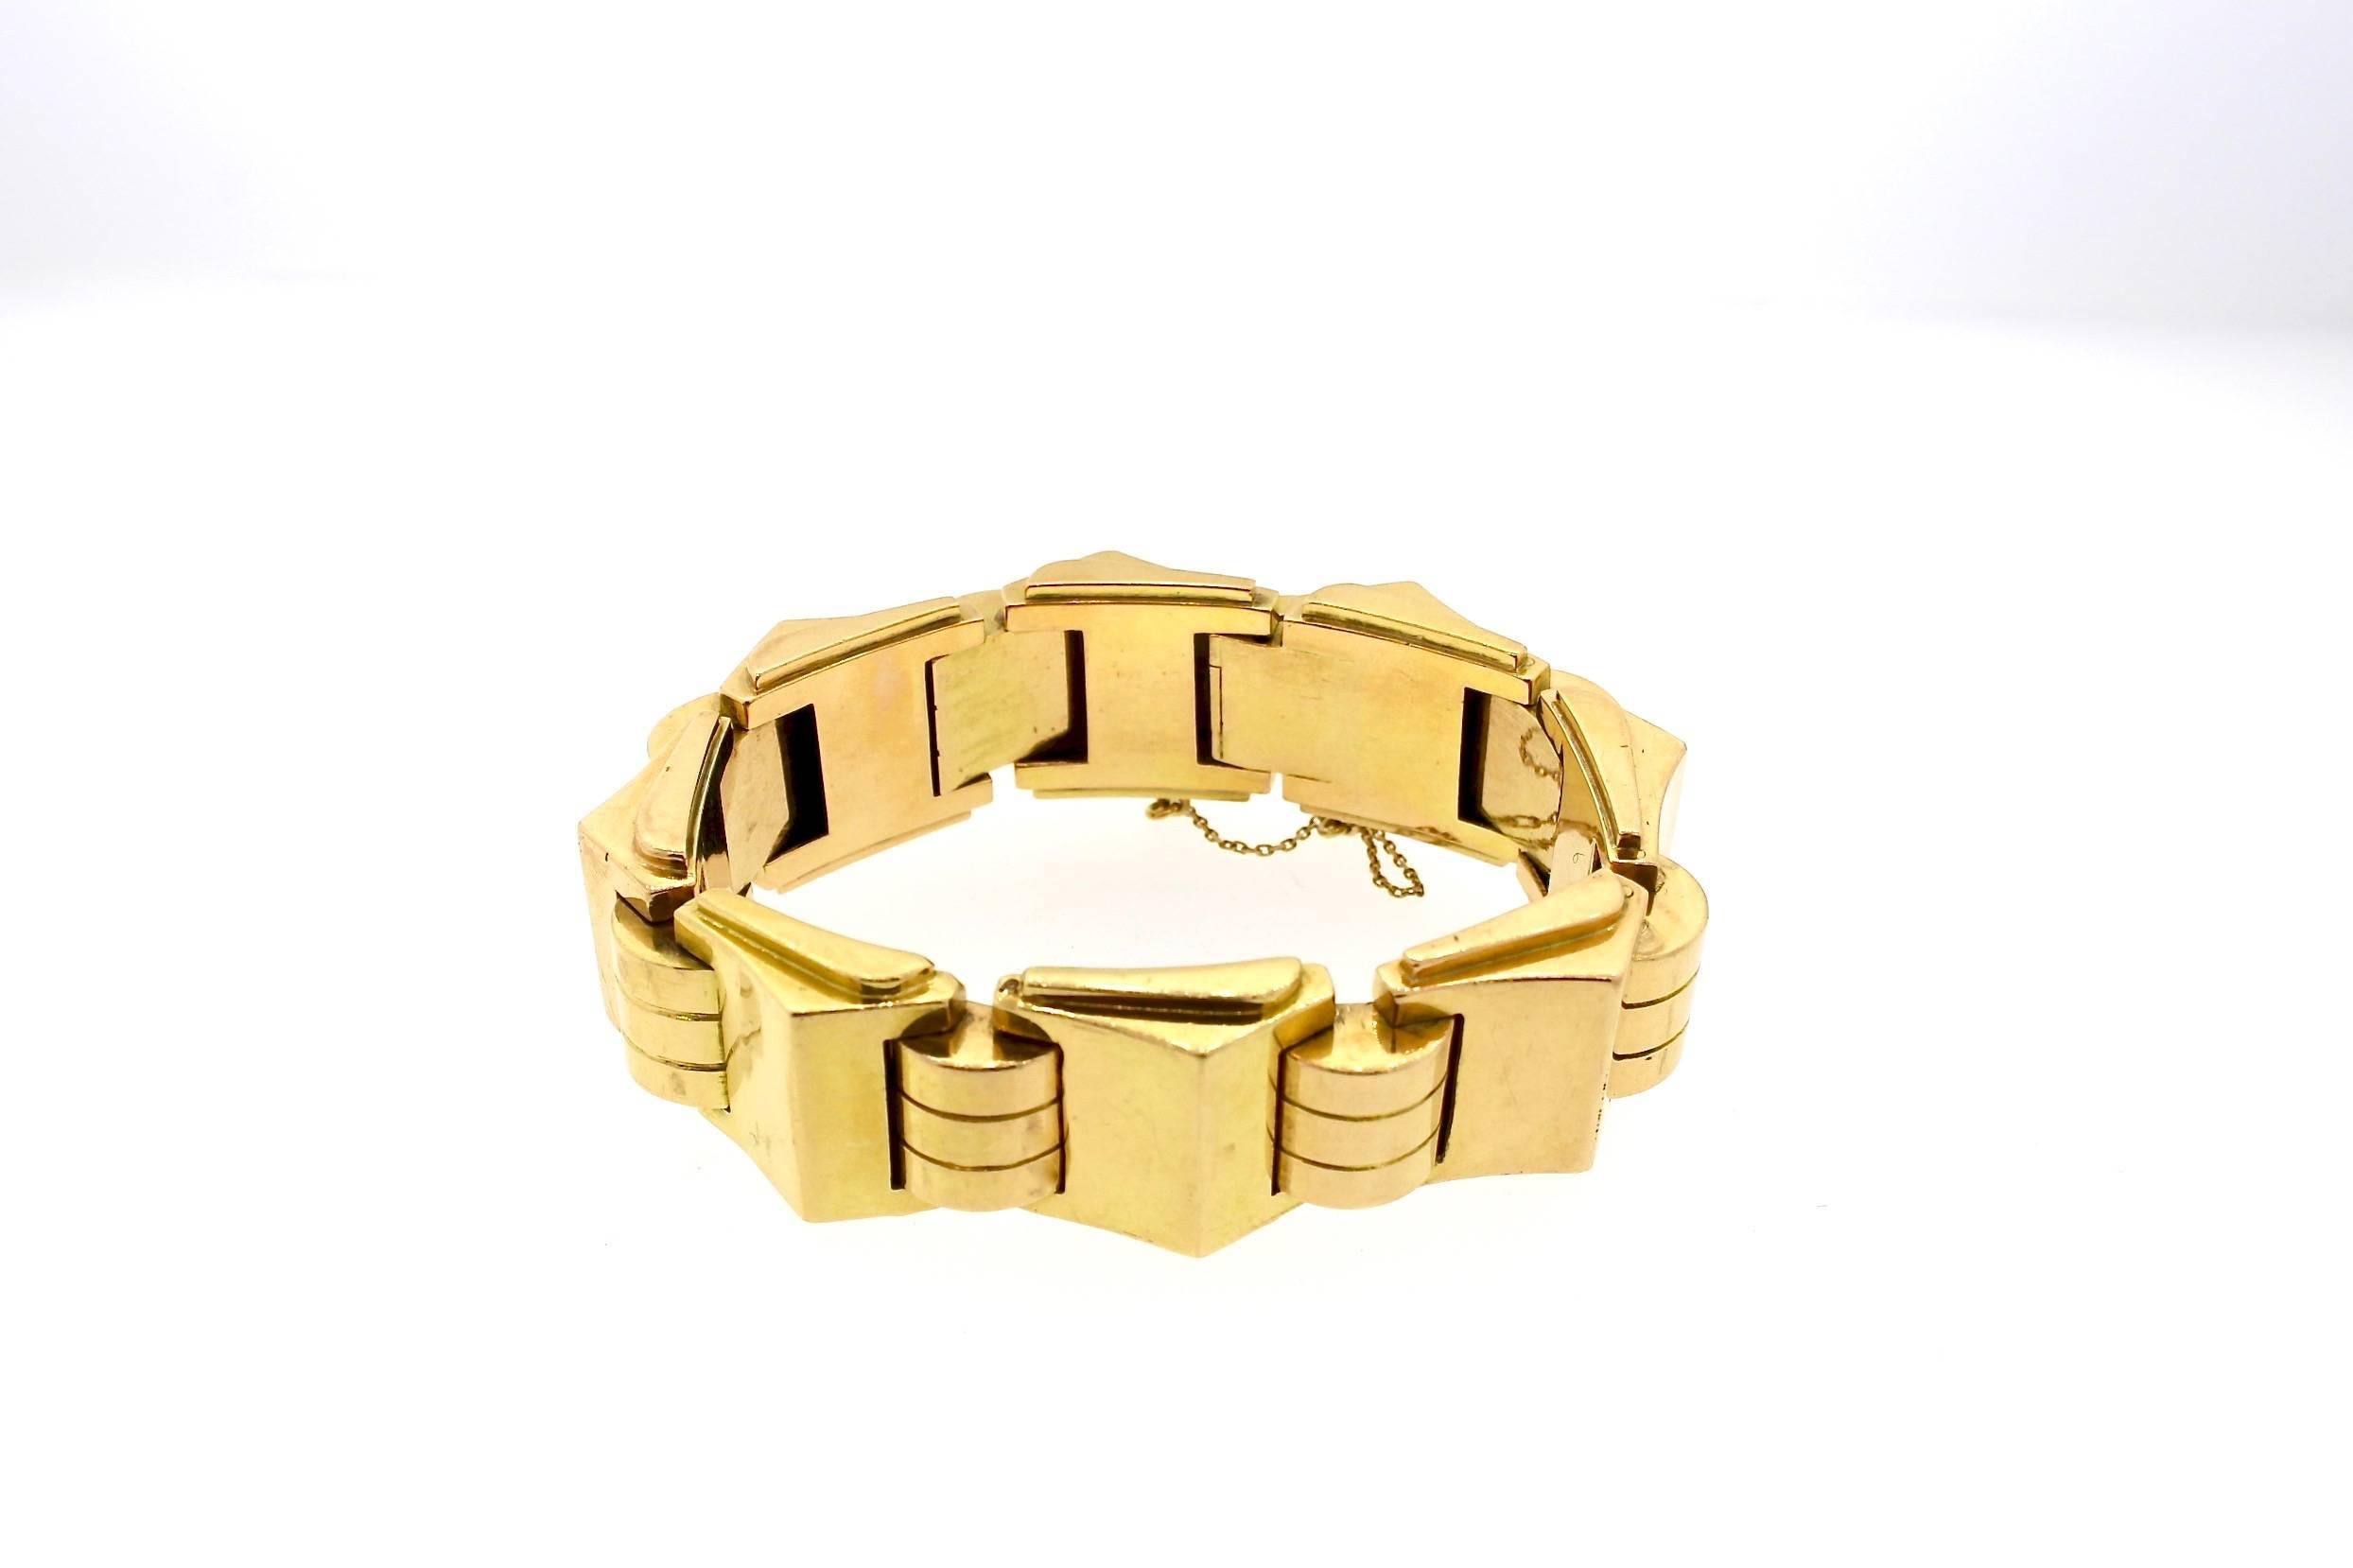 This bold Retro bracelet is an everyday easy to wear dream.  They became popular during World War II when the links of the bracelet were made to resemble the tread of a tank.  This heavy and bold 18k yellow gold link bracelet was made in France and